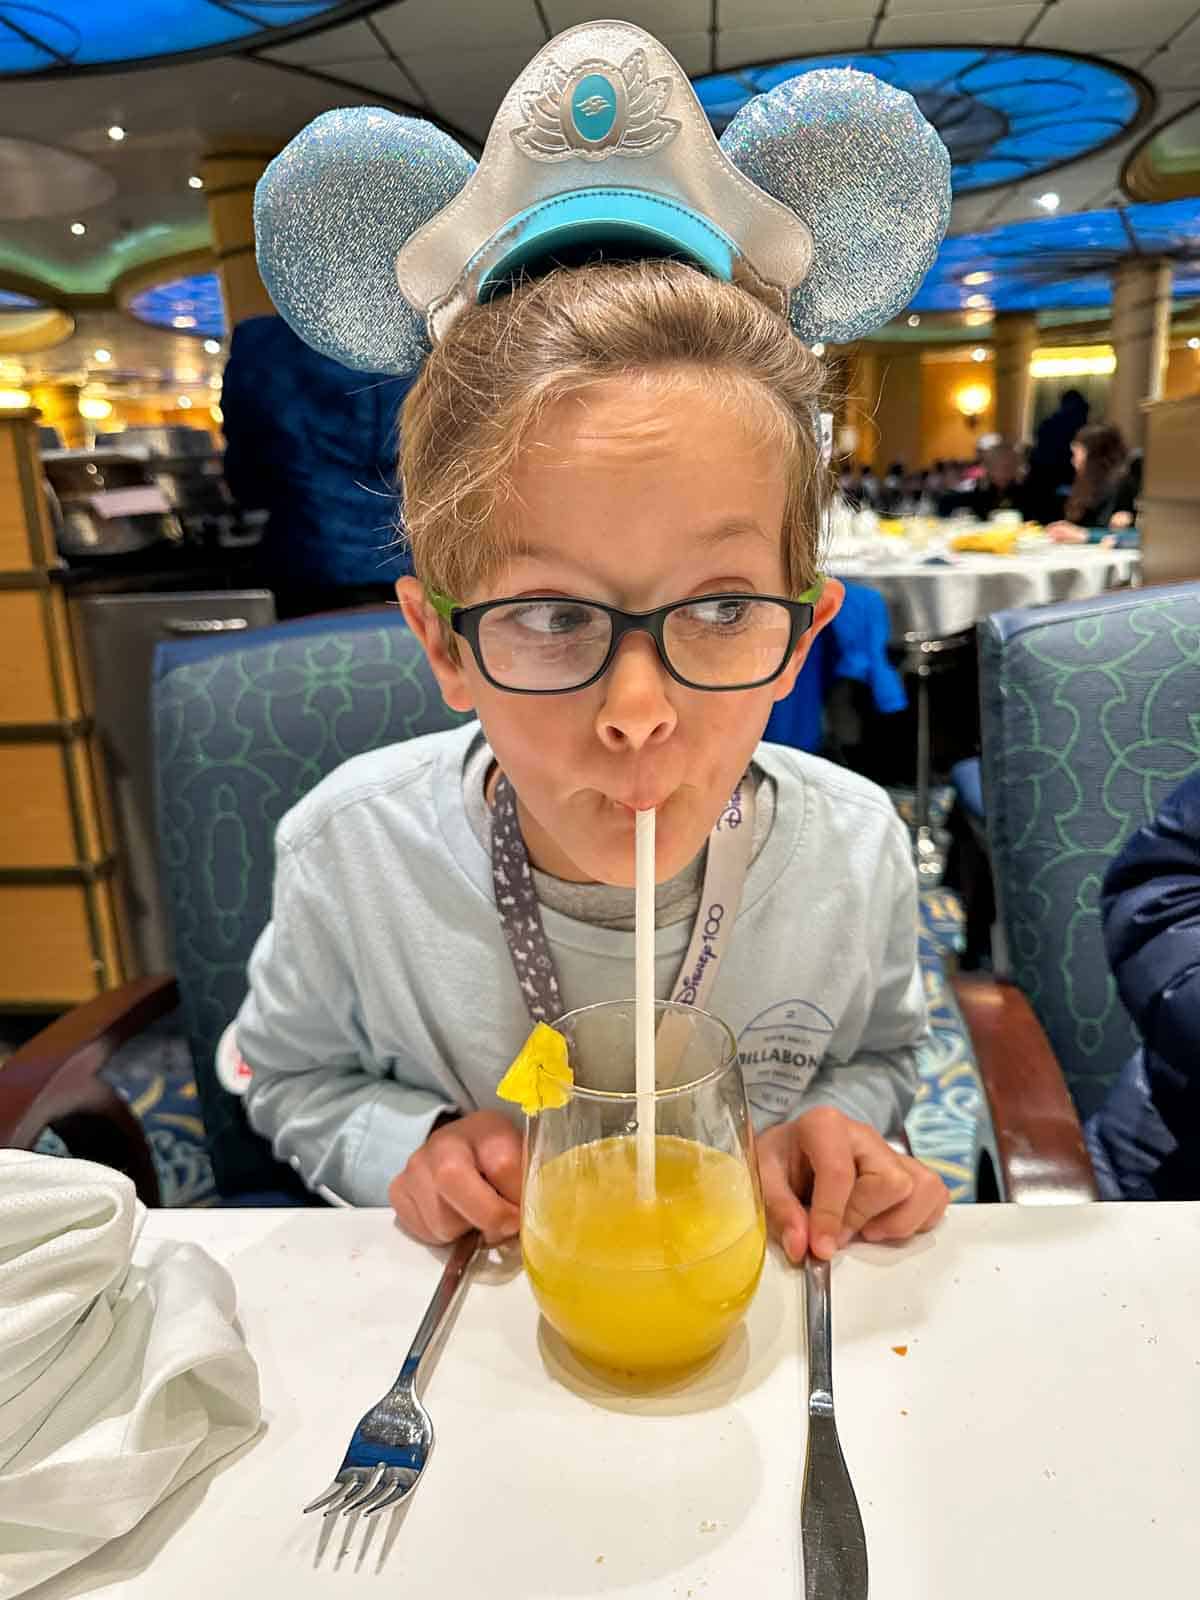 A boy with blue Mickey ears taking a drink from a straw in a glass with yellow juice in it.